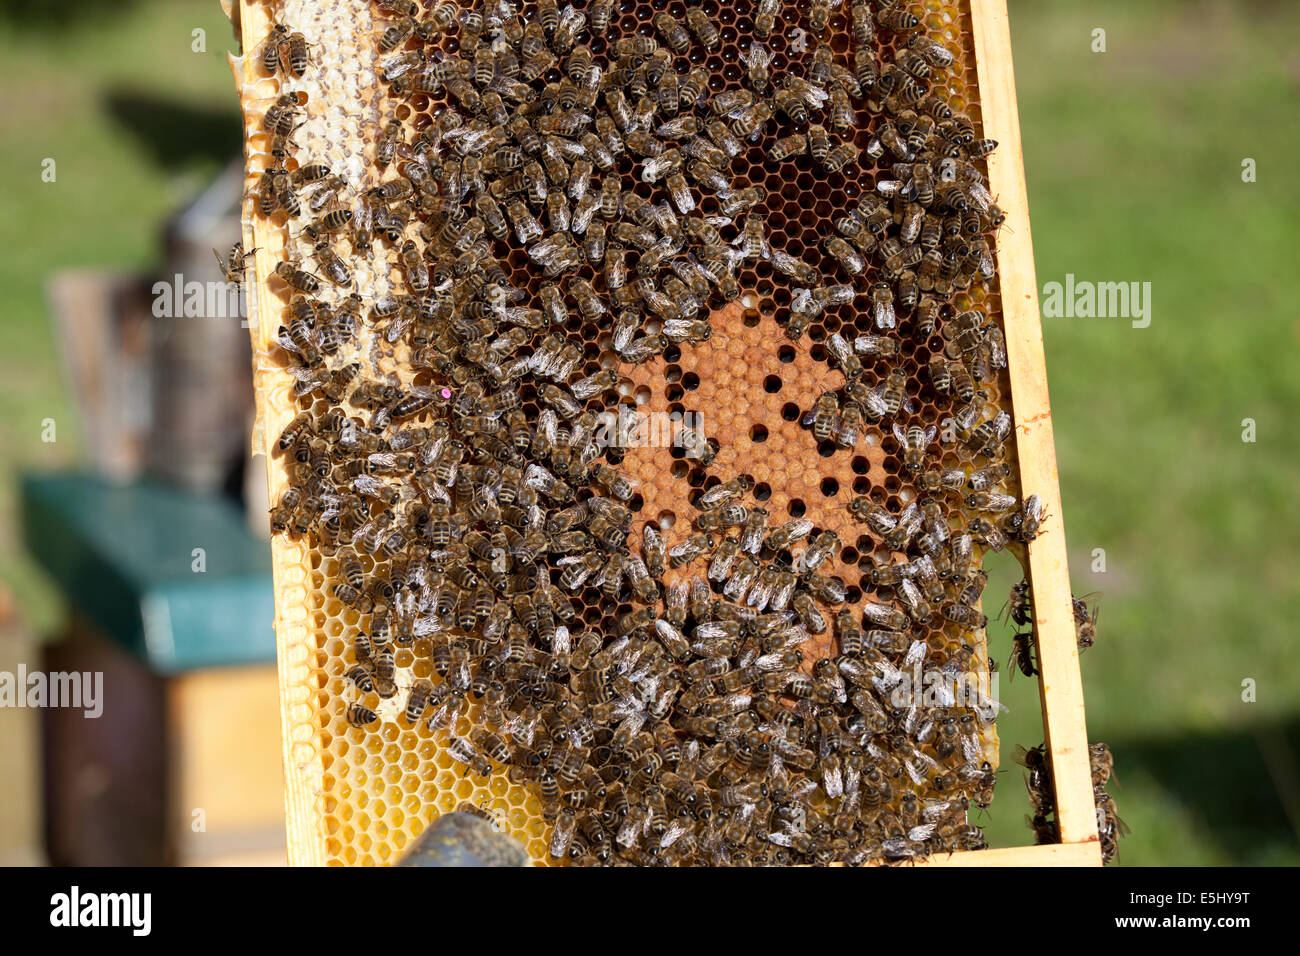 bees with brood comb and queen bee Stock Photo